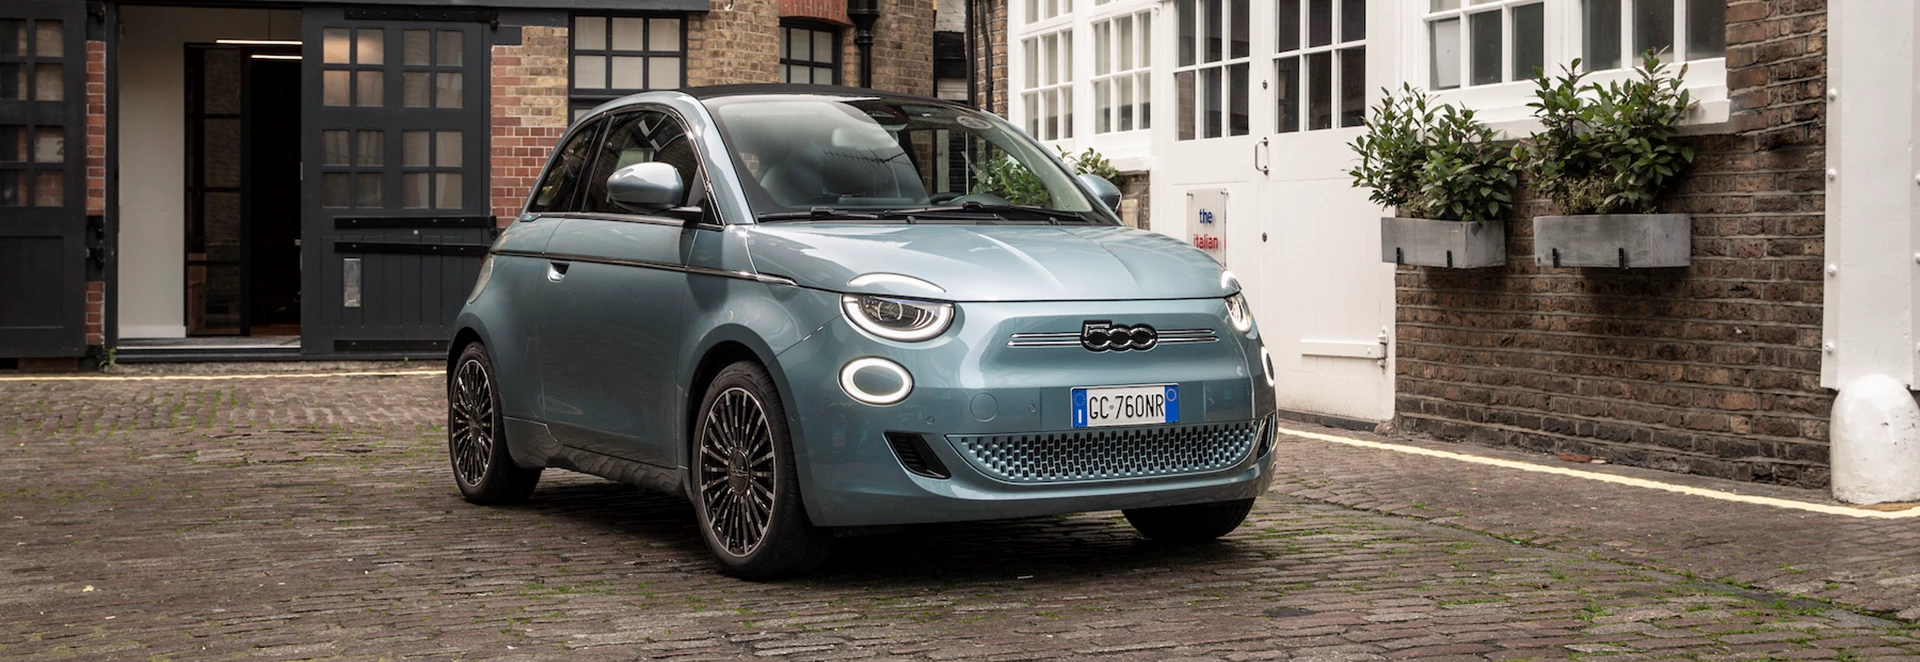 5 reasons why the Fiat 500 electric is the perfect small EV 